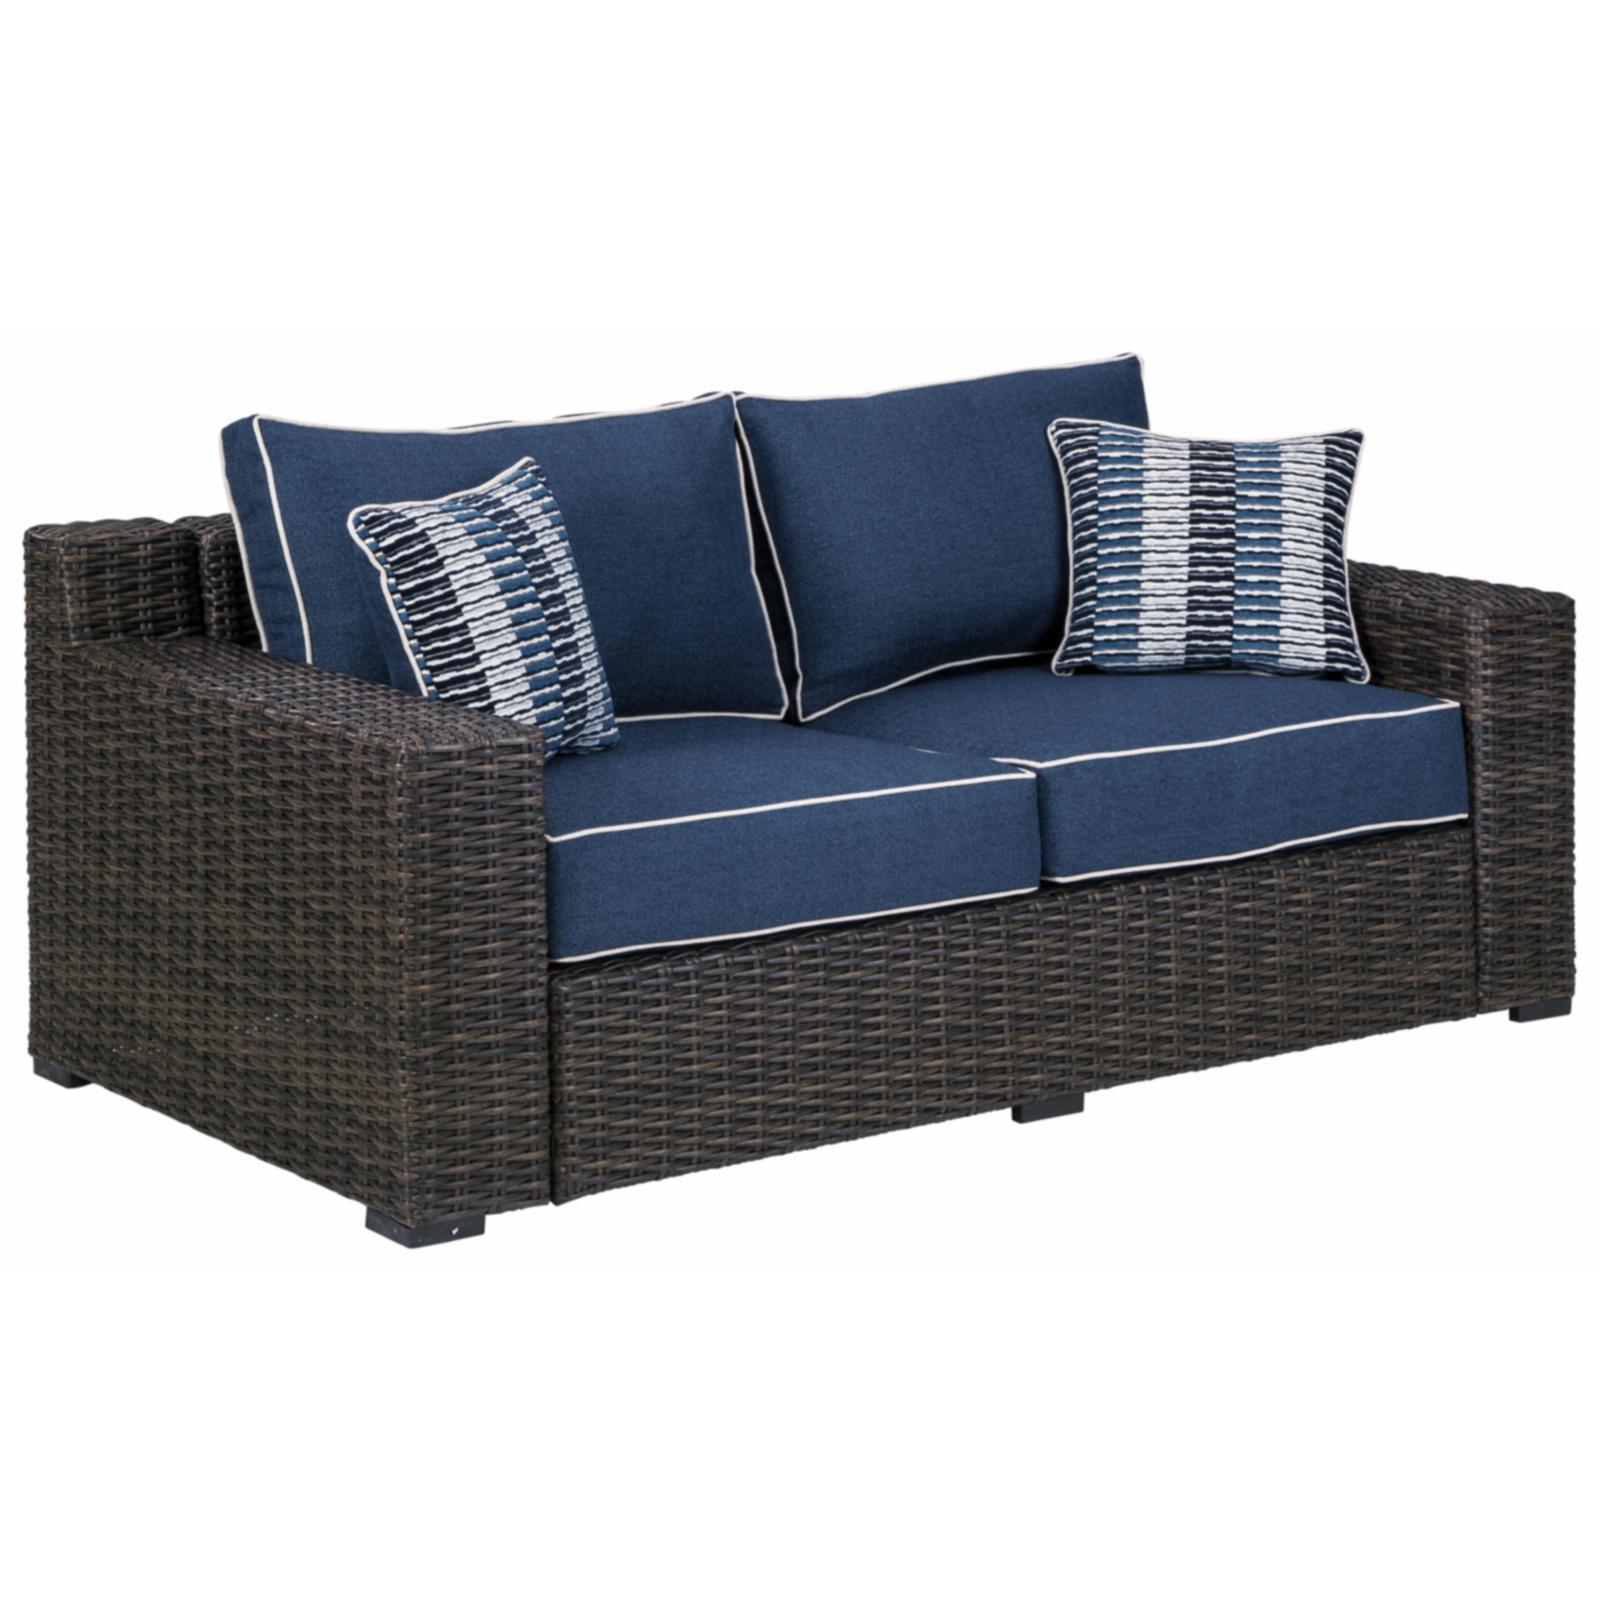 Transitional Blue and Brown Wicker Loveseat with Plush Cushions